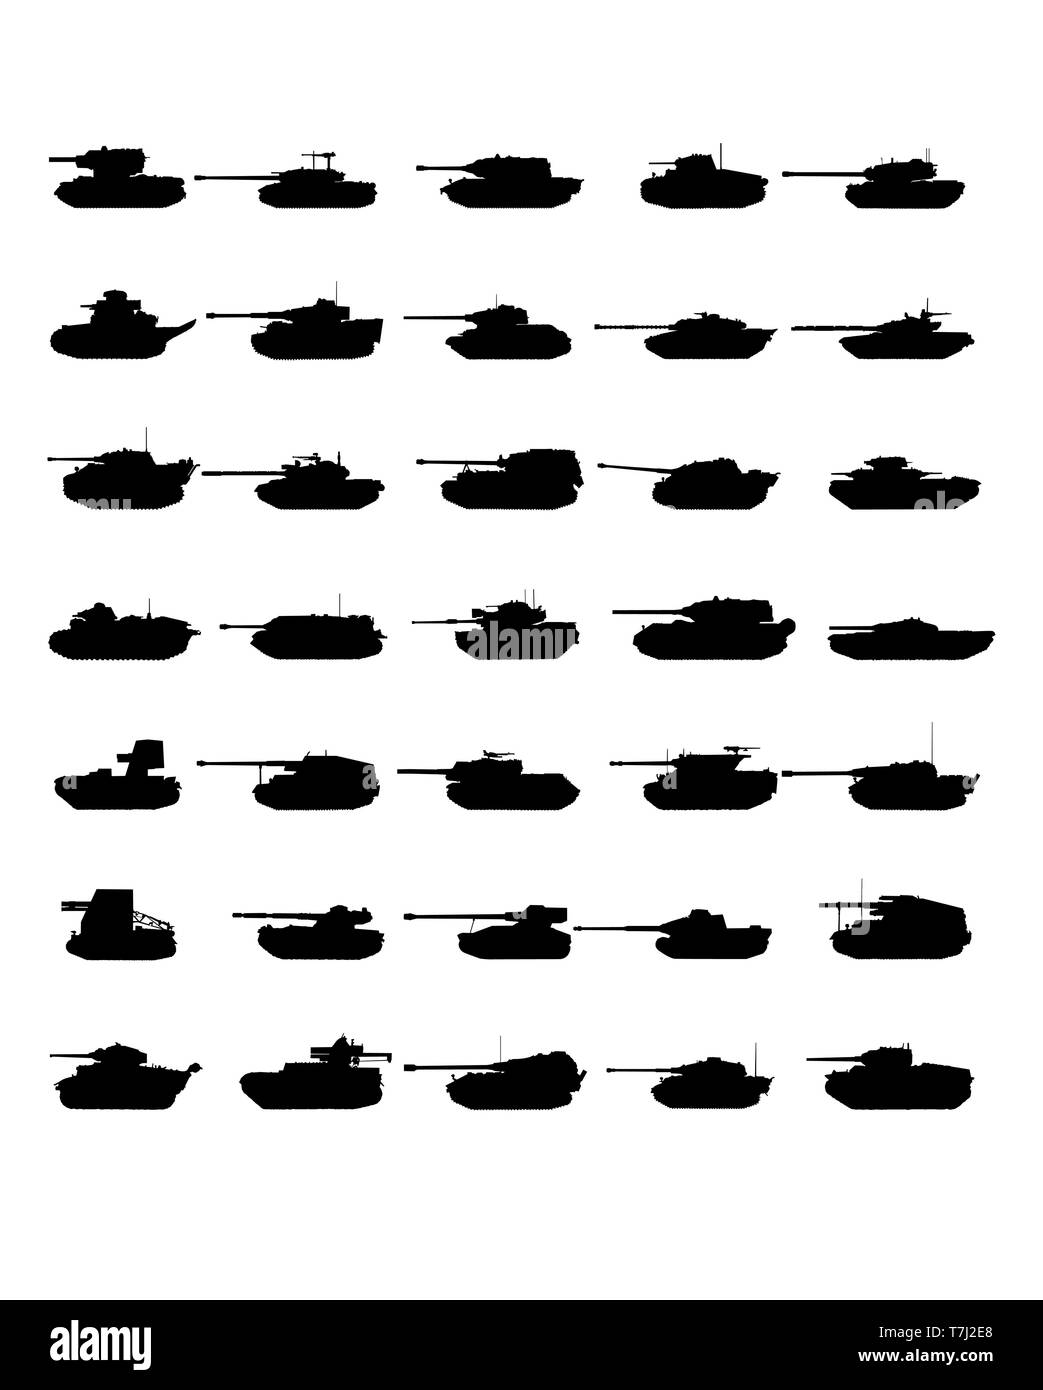 Tank icon vector war military design silhouette set isolated army design machine force defense fire Stock Vector